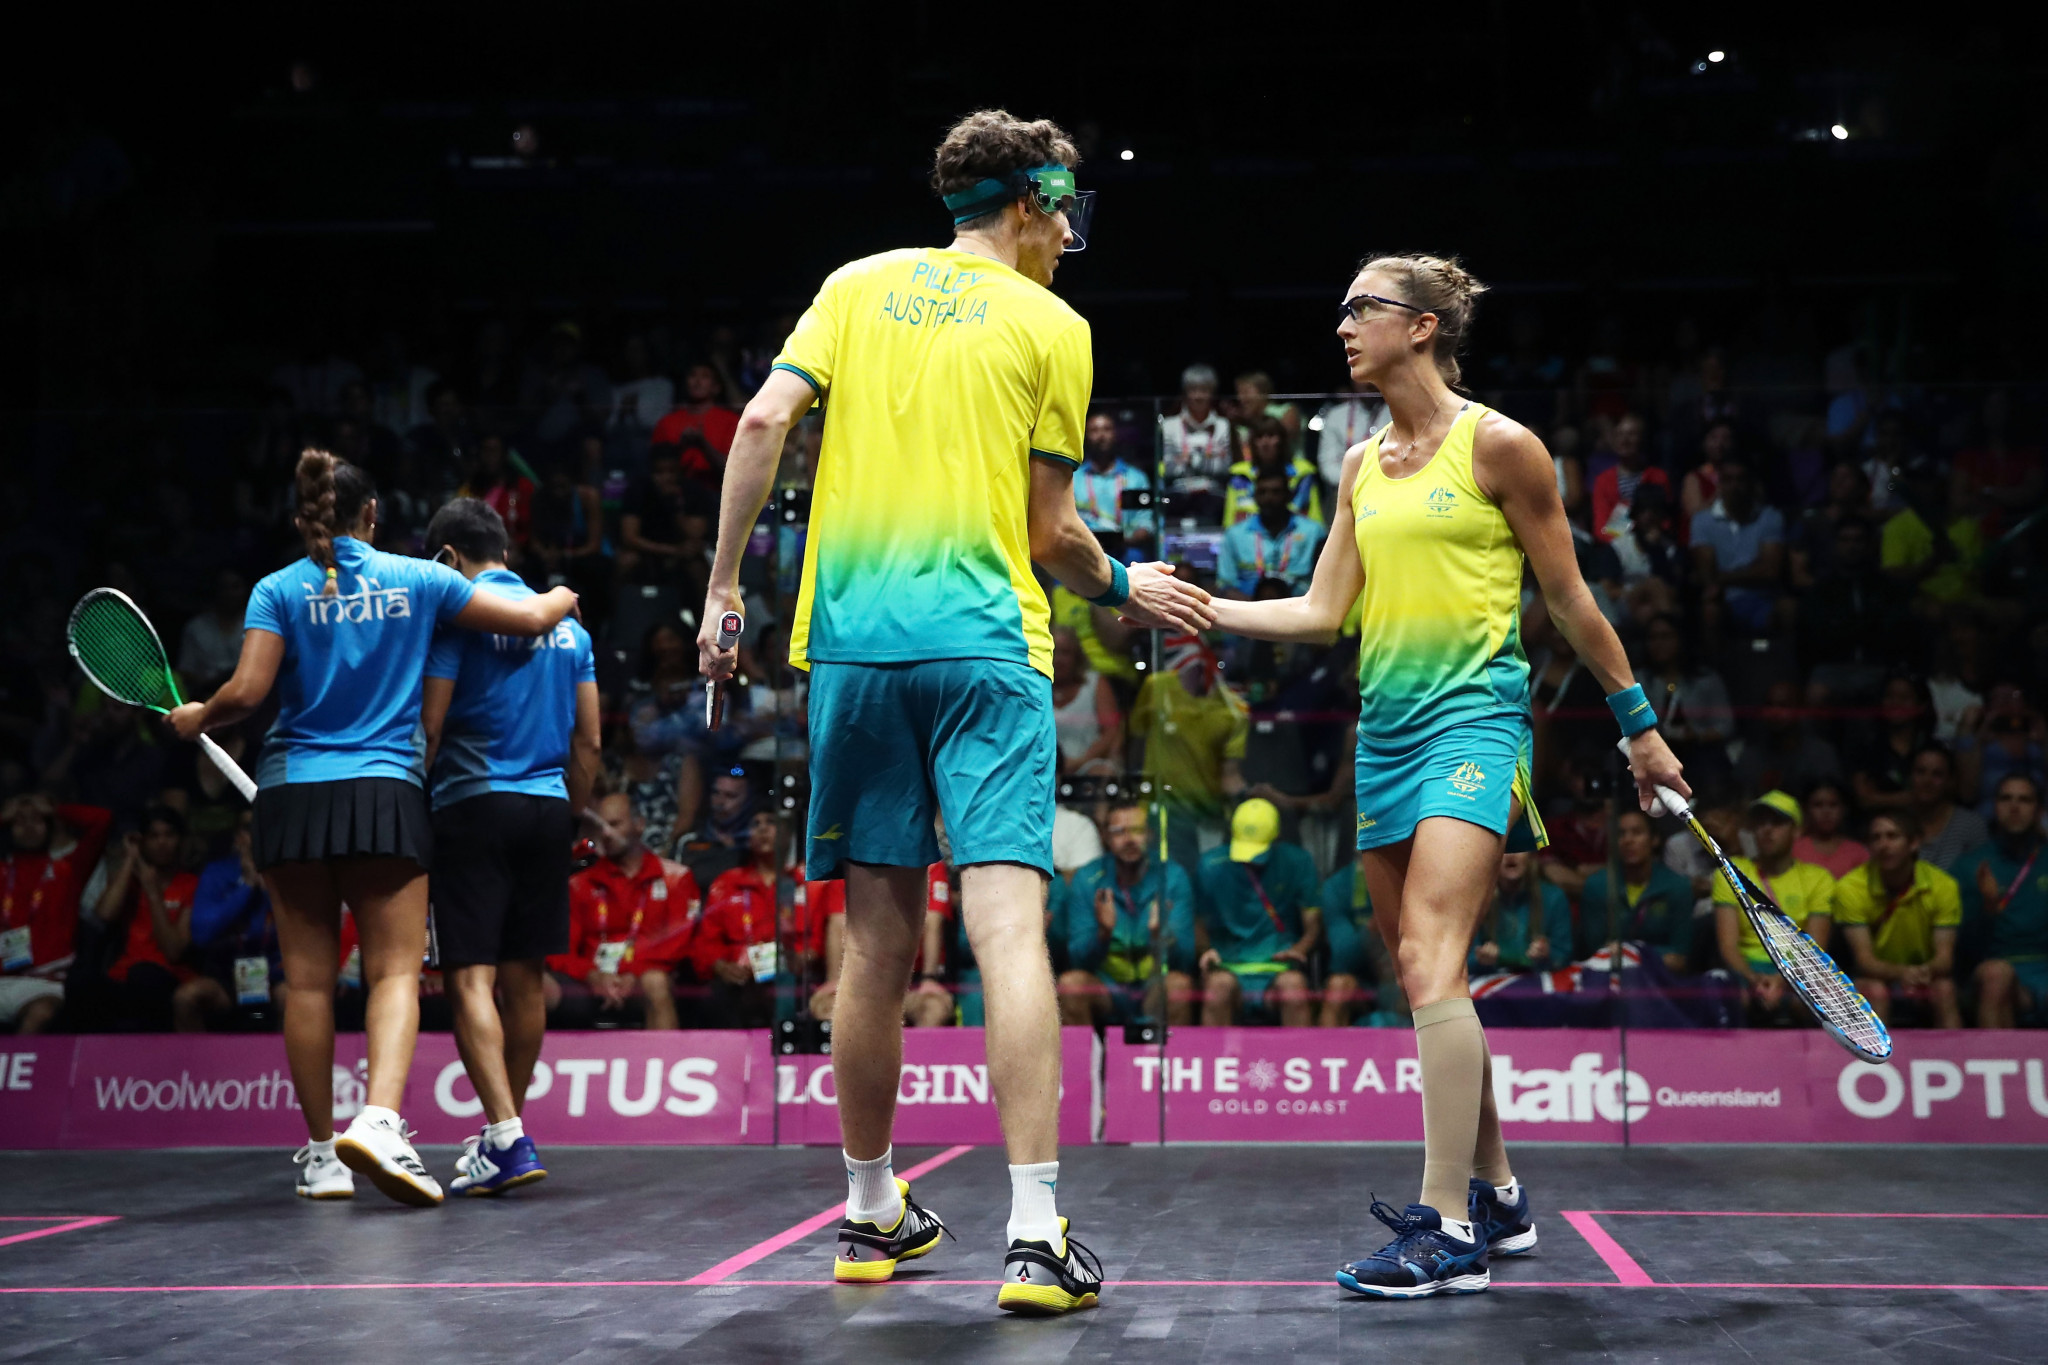 Australia are expected to dominate at the WSF World Doubles Squash Championships ©Getty Images